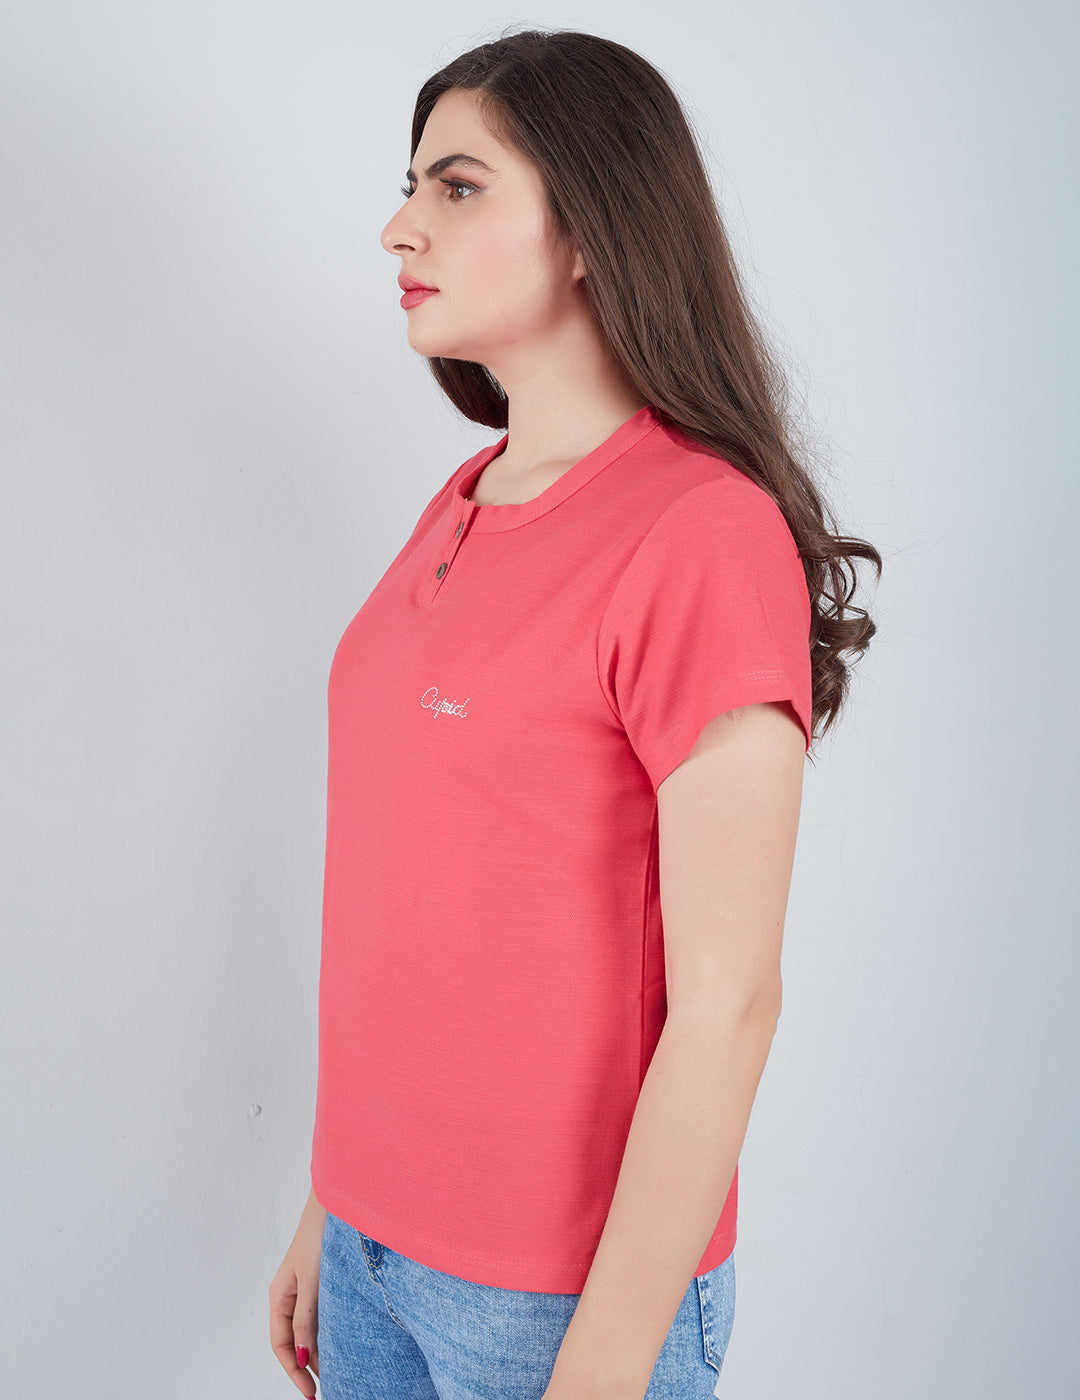 Comfortable Plain Short T-shirts For Women - Pink At Online